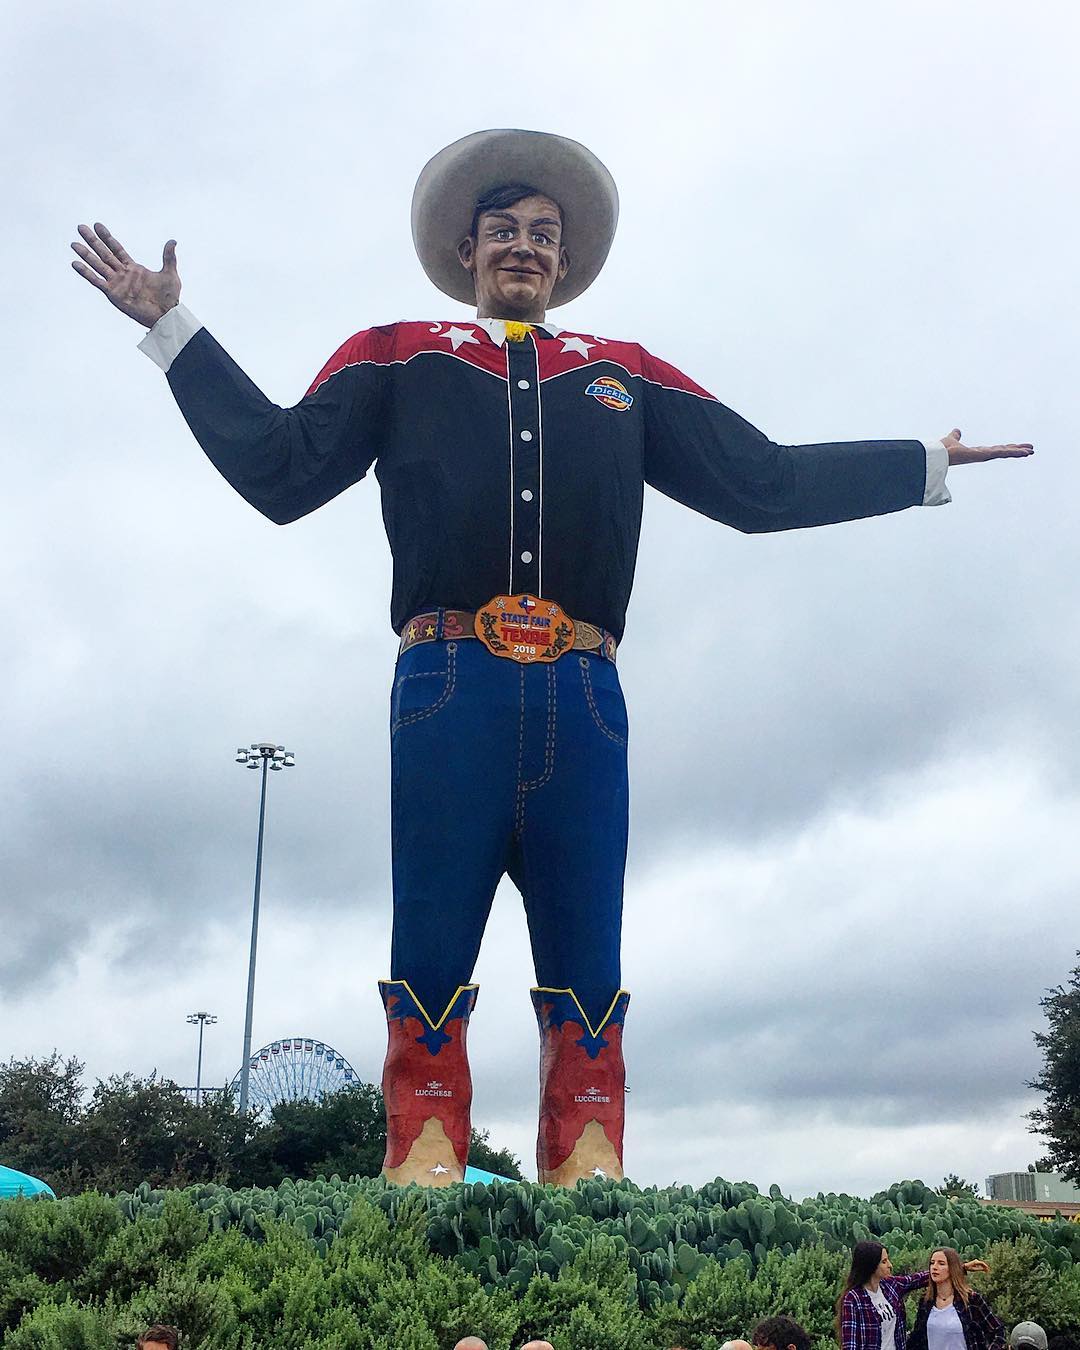 Large cowboy statue on the Texas State Fairgrounds Photo by Instagram user @kvuenews